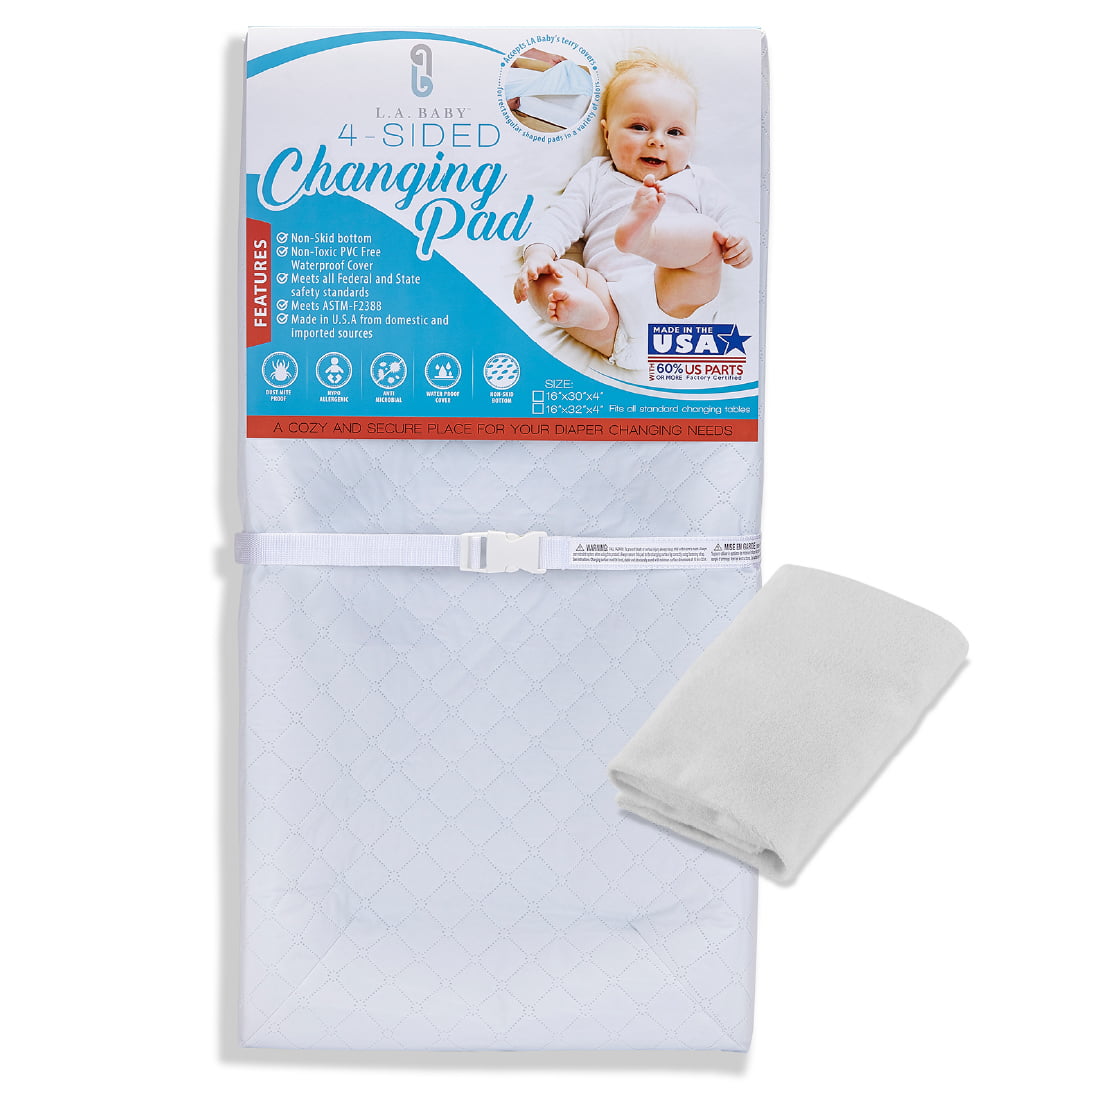 LA Baby 4 Sided Changing Pad with Organic Cotton Layer 30"L x 16"W x 4"H 